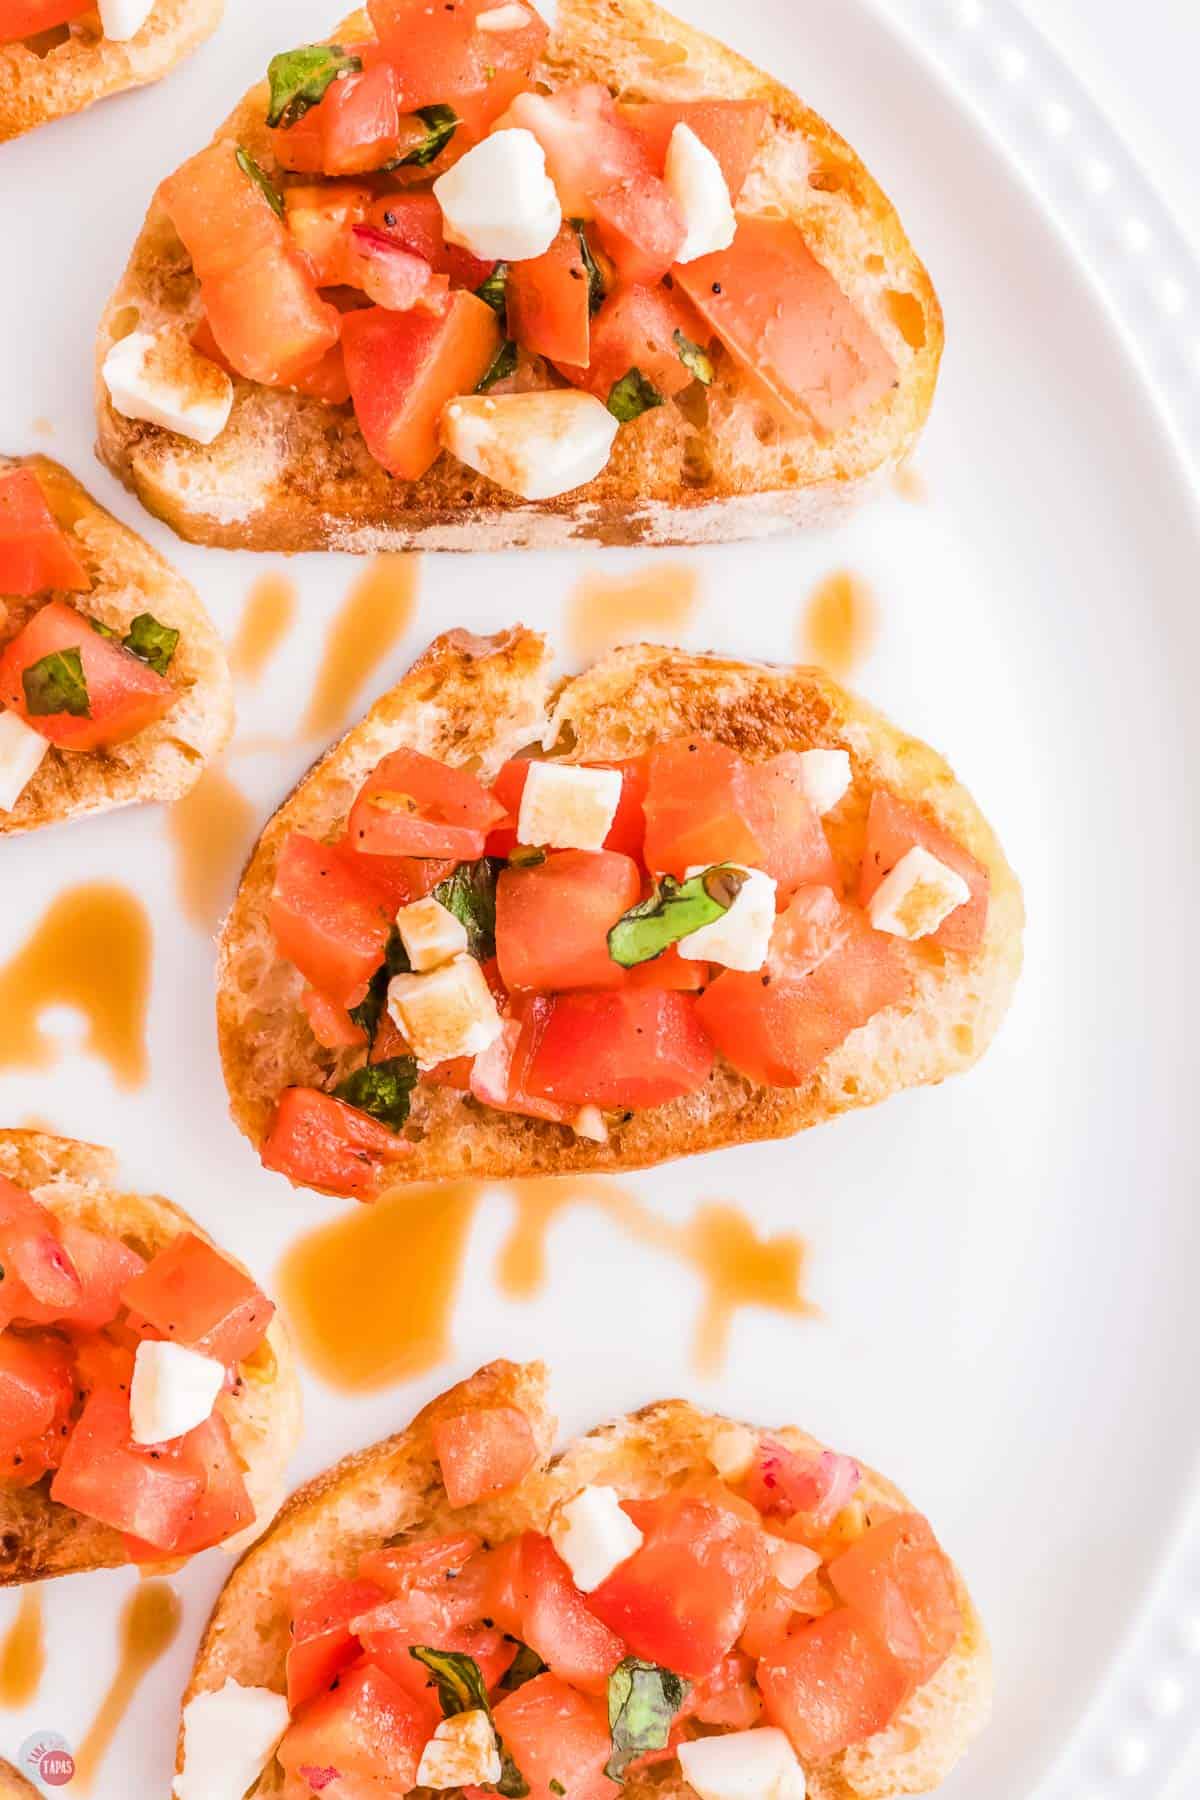 peak tomato season is perfect for making this appetizer